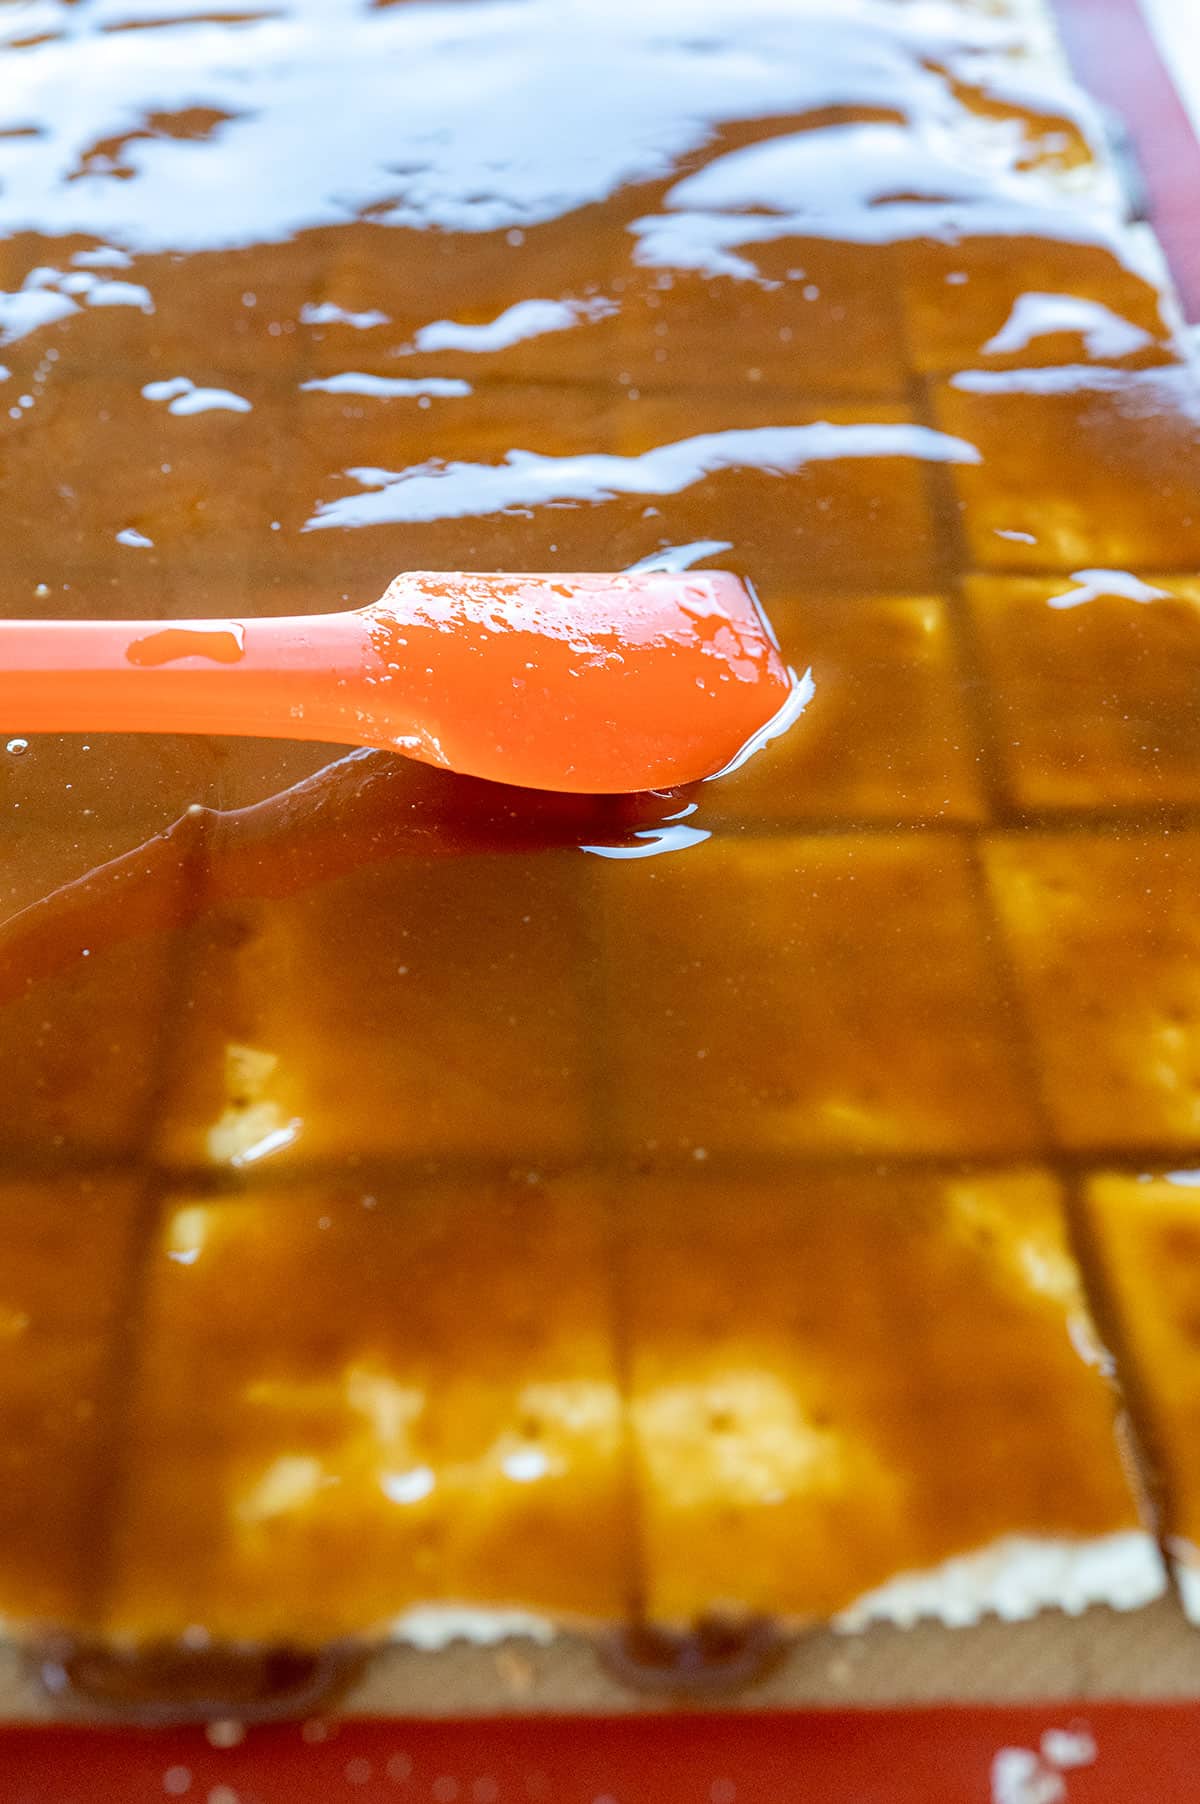 Using a spatula to spread toffee on crackers.